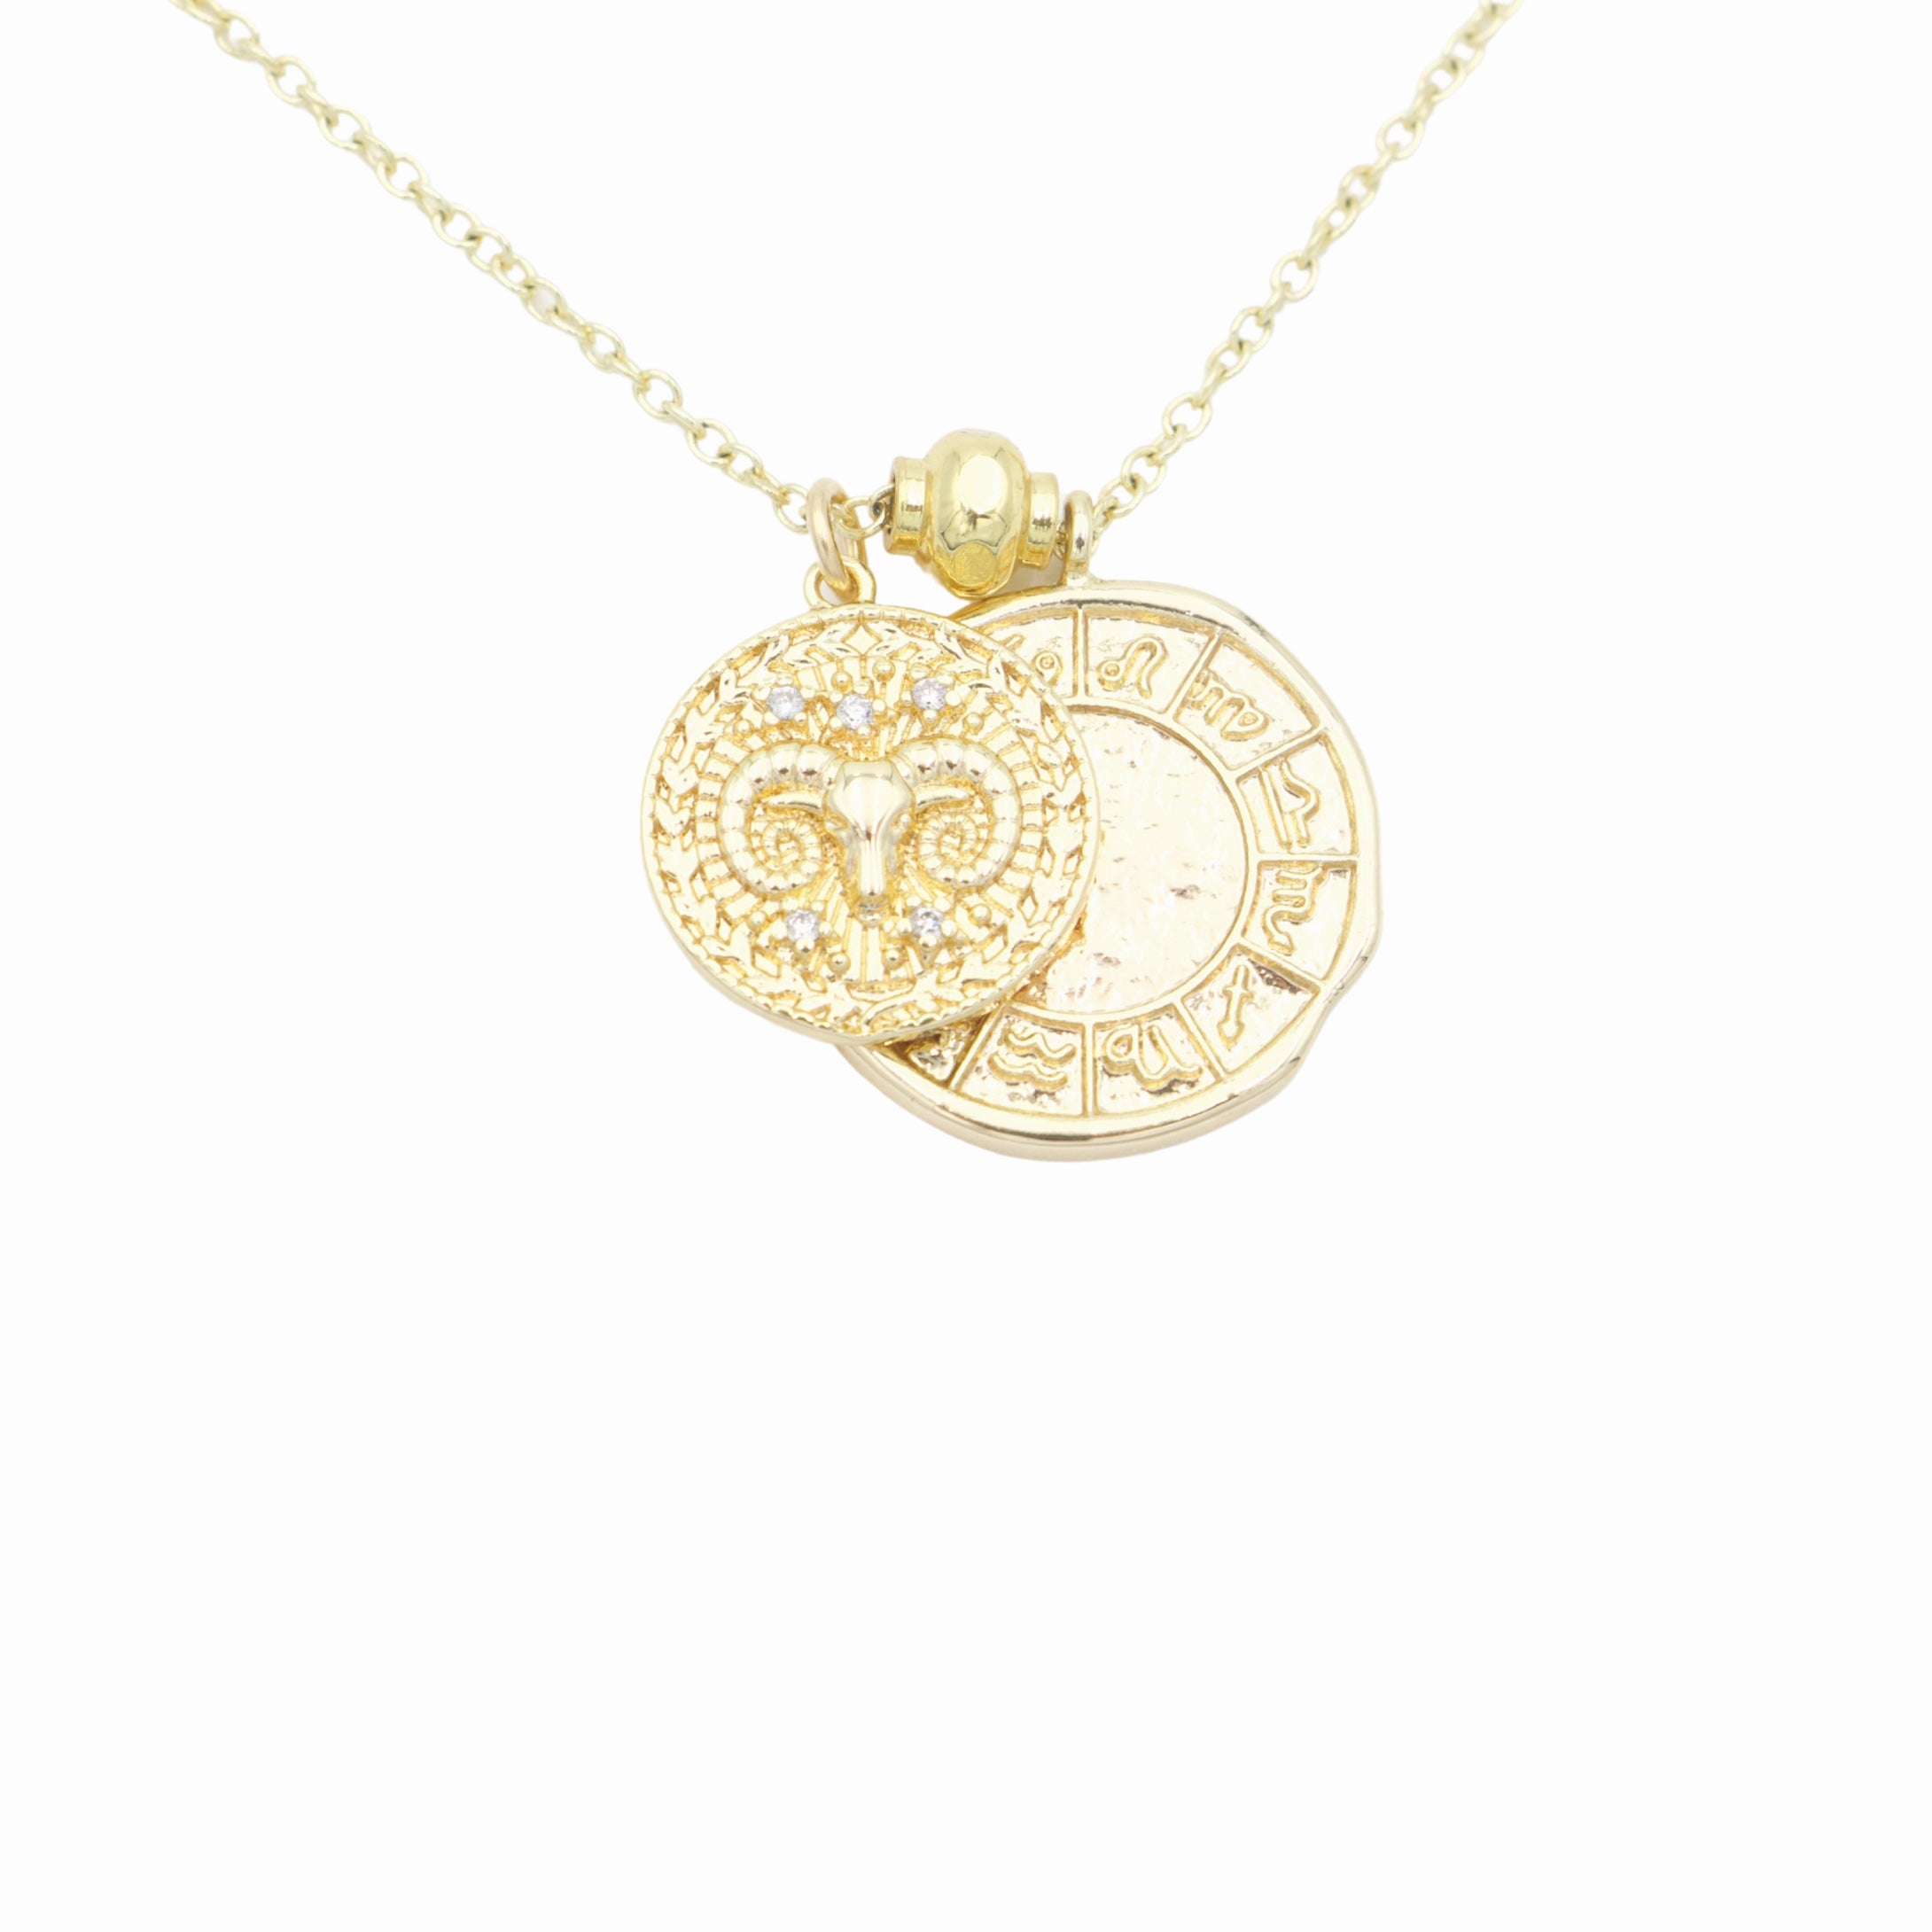 AW Boutique's dual zodiac coin necklace featuring a dainty necklace chain, zodiac rustic coin charm, and your chosen star sign coin charm. Charms separated by a gold bead. Part of the Celestial Collection. Gold filled jewellery. Option shown is Aries.